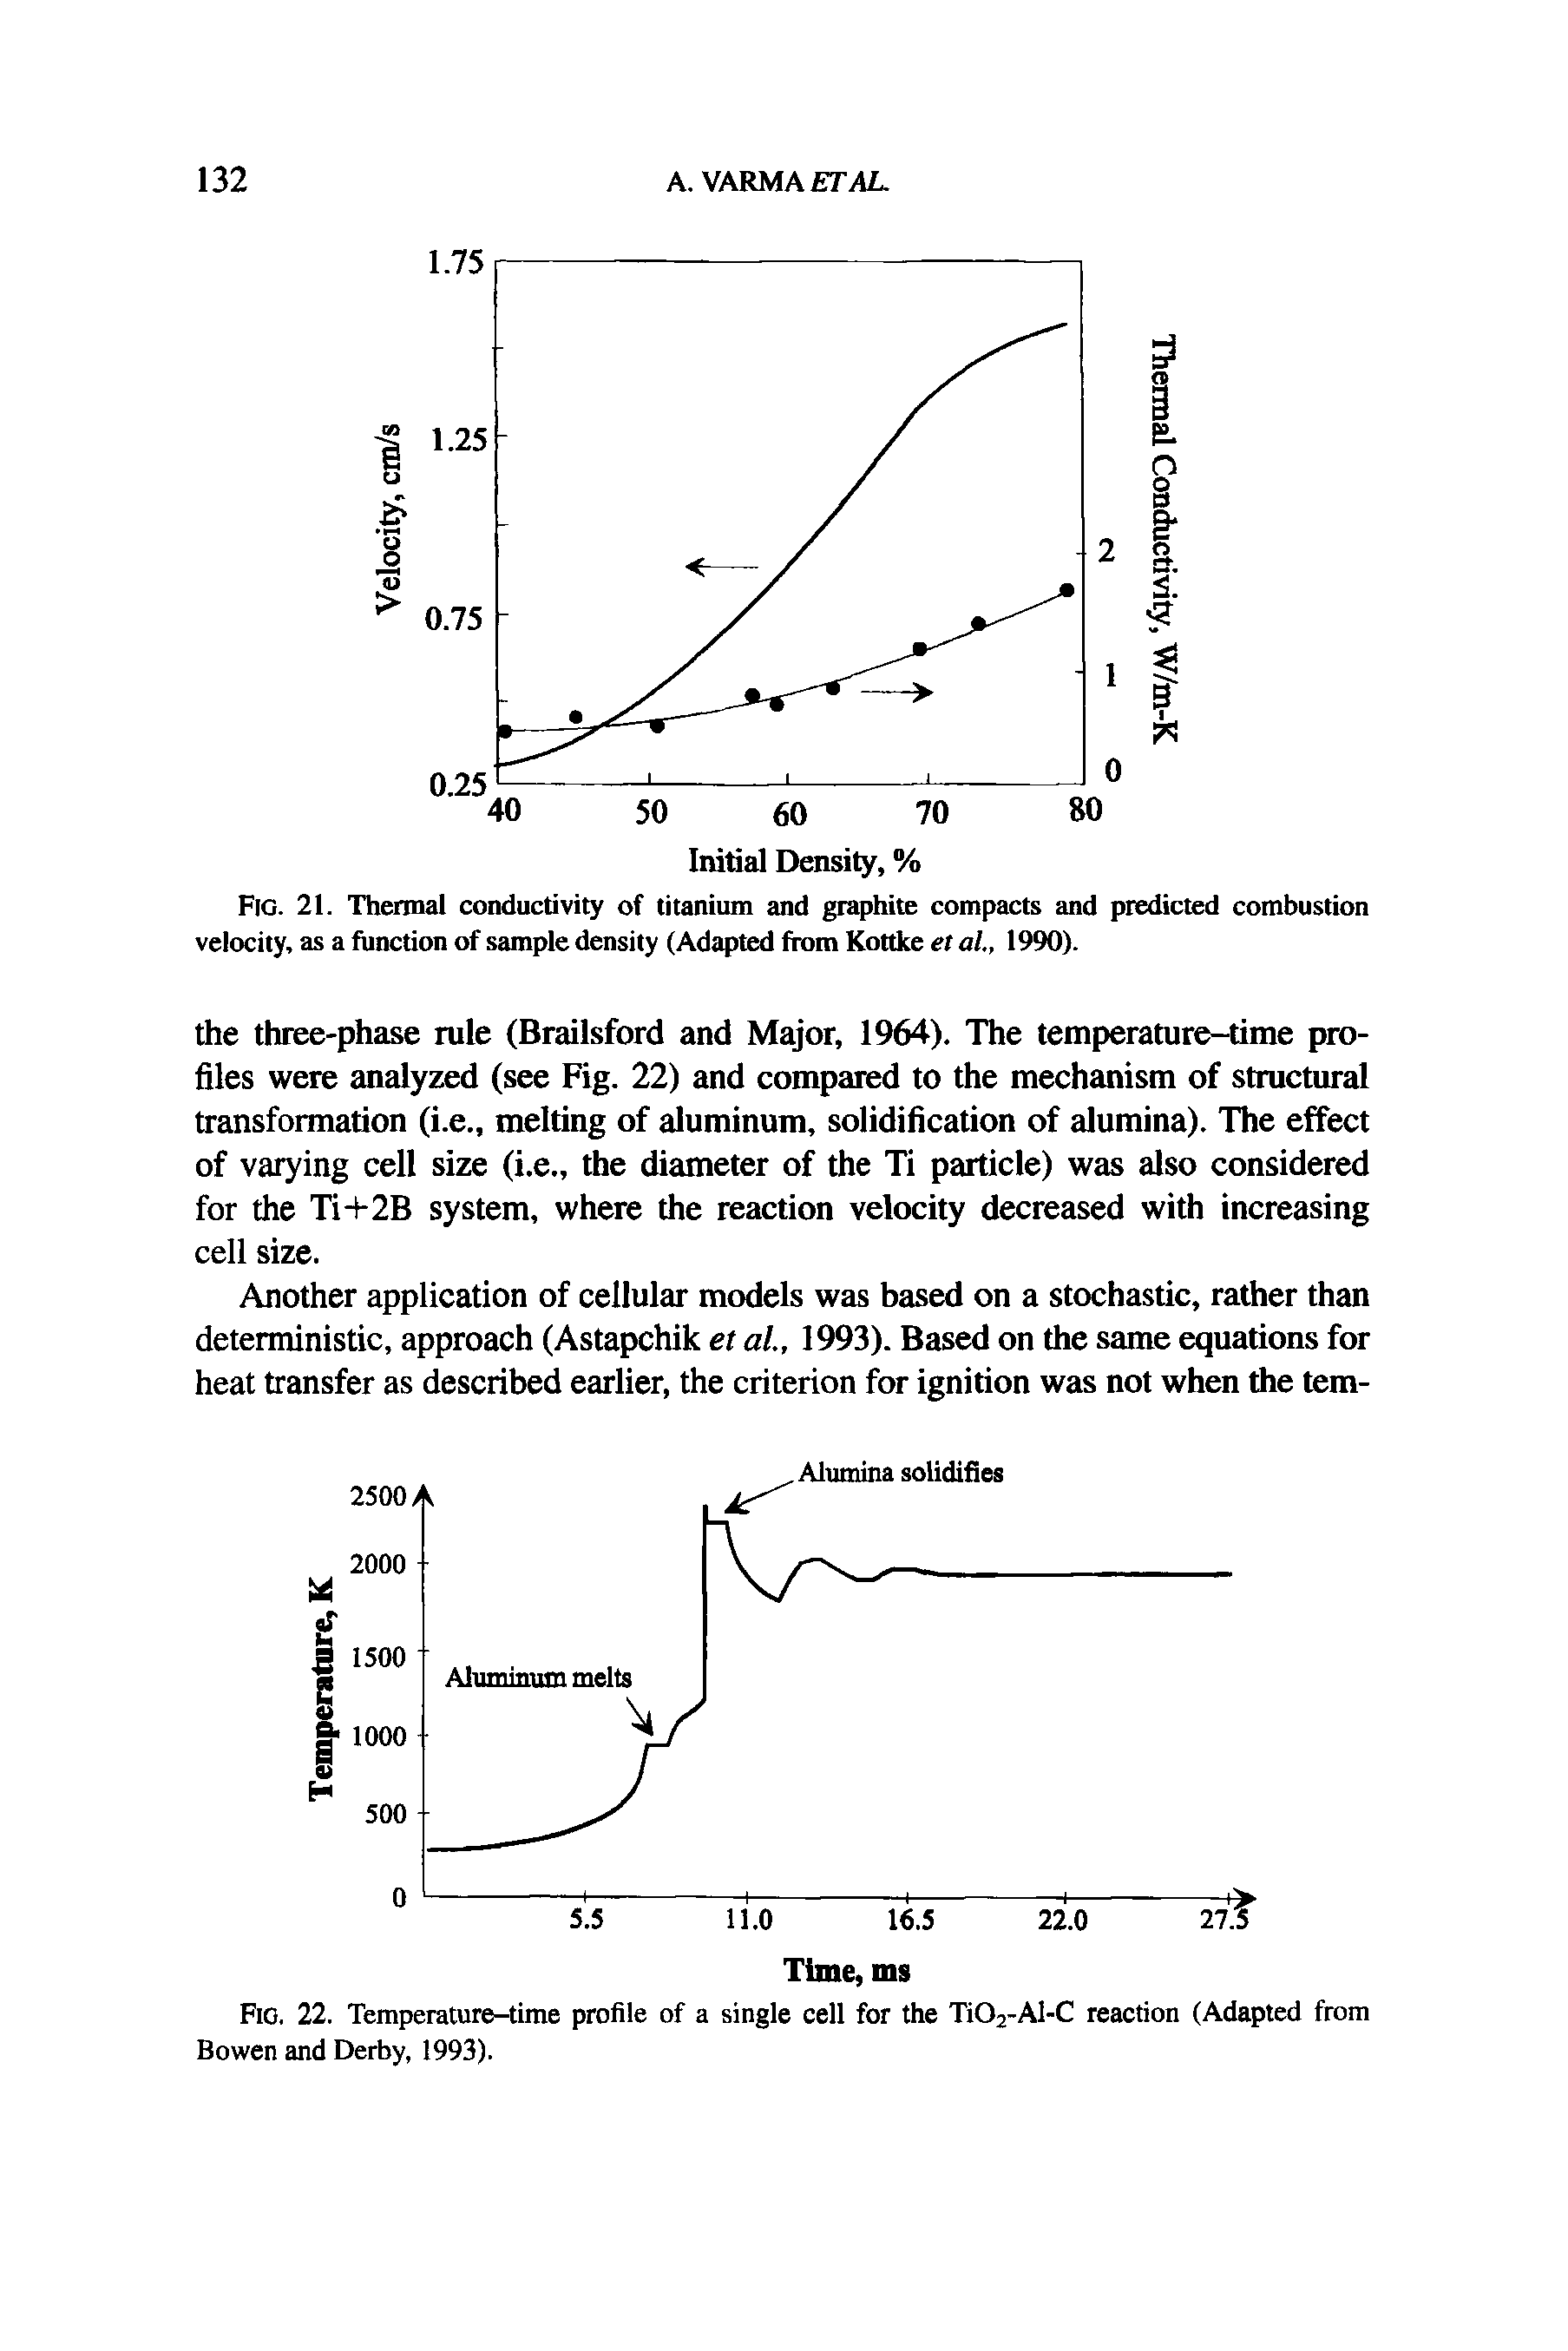 Fig. 21. Thennal conductivity of titanium and graphite compacts and predicted combustion velocity, as a function of sample density (Adapted from Kottke et al 1990).